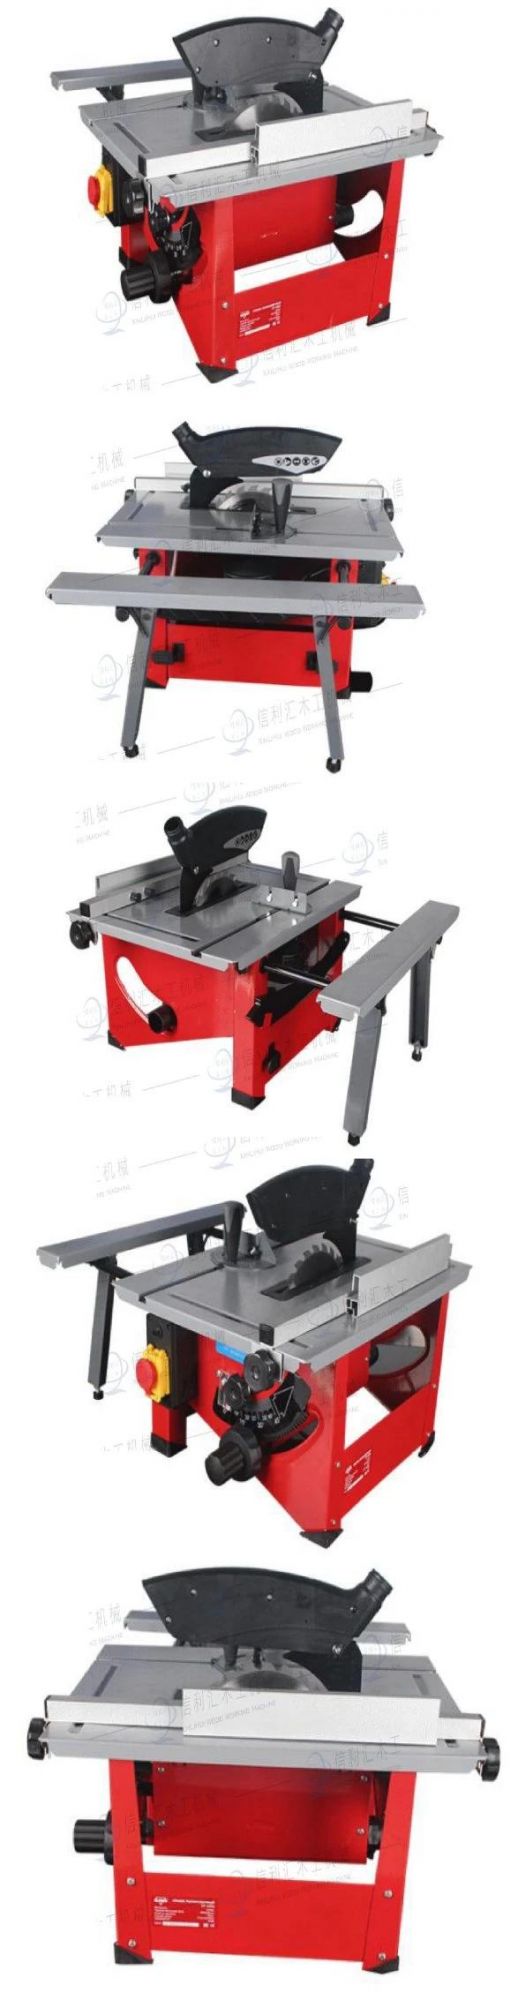 Small Chainsaw 45 Angle Multi-Functional Small Electric Saw Woodworking_Machinery Saw Wood Plate Power Tools, Small Cutting Saw, Serra Circular De Bancada